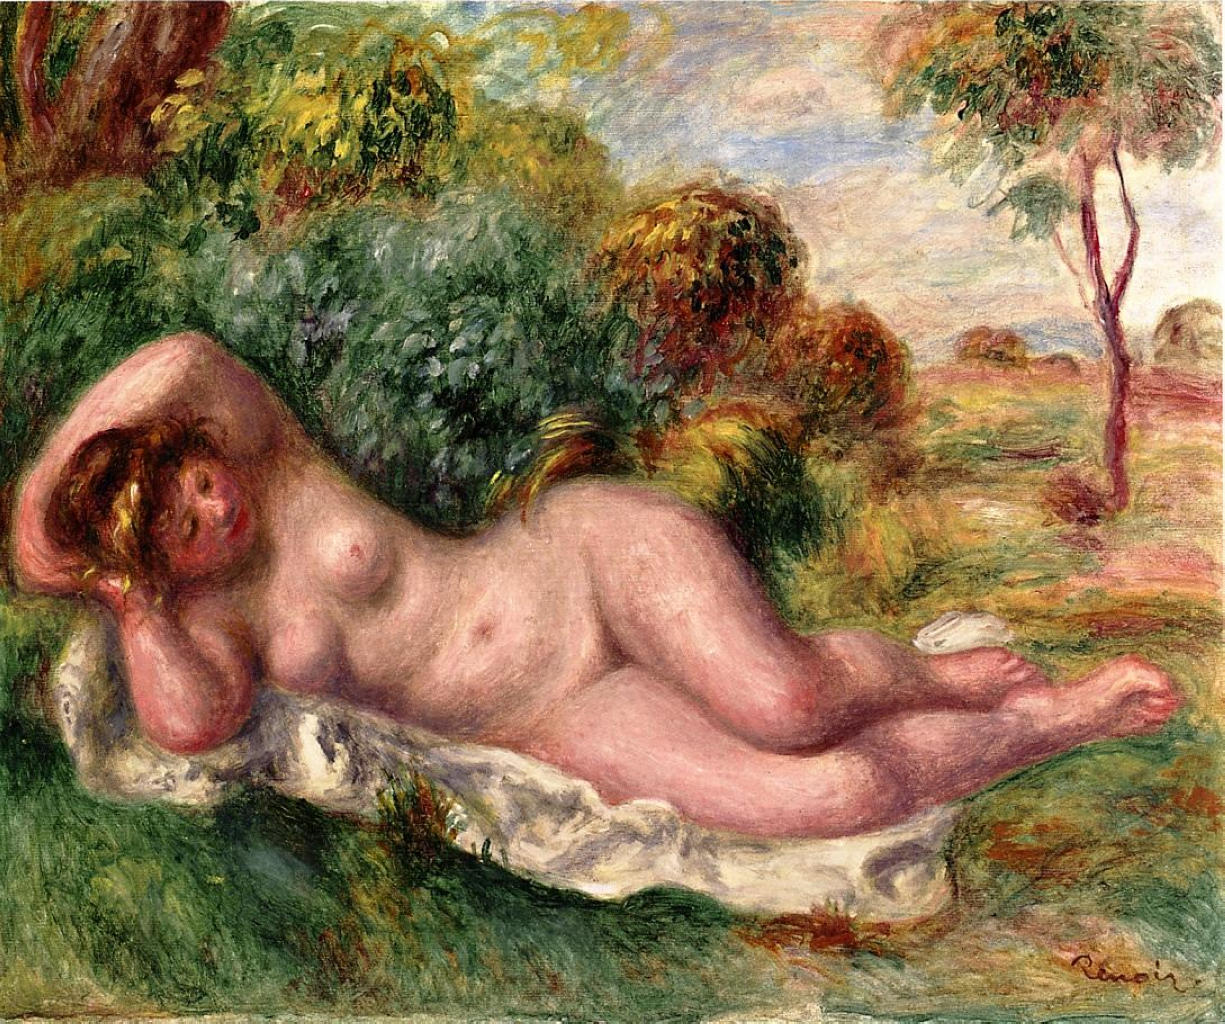 Reclining nude the baker's wife 1902